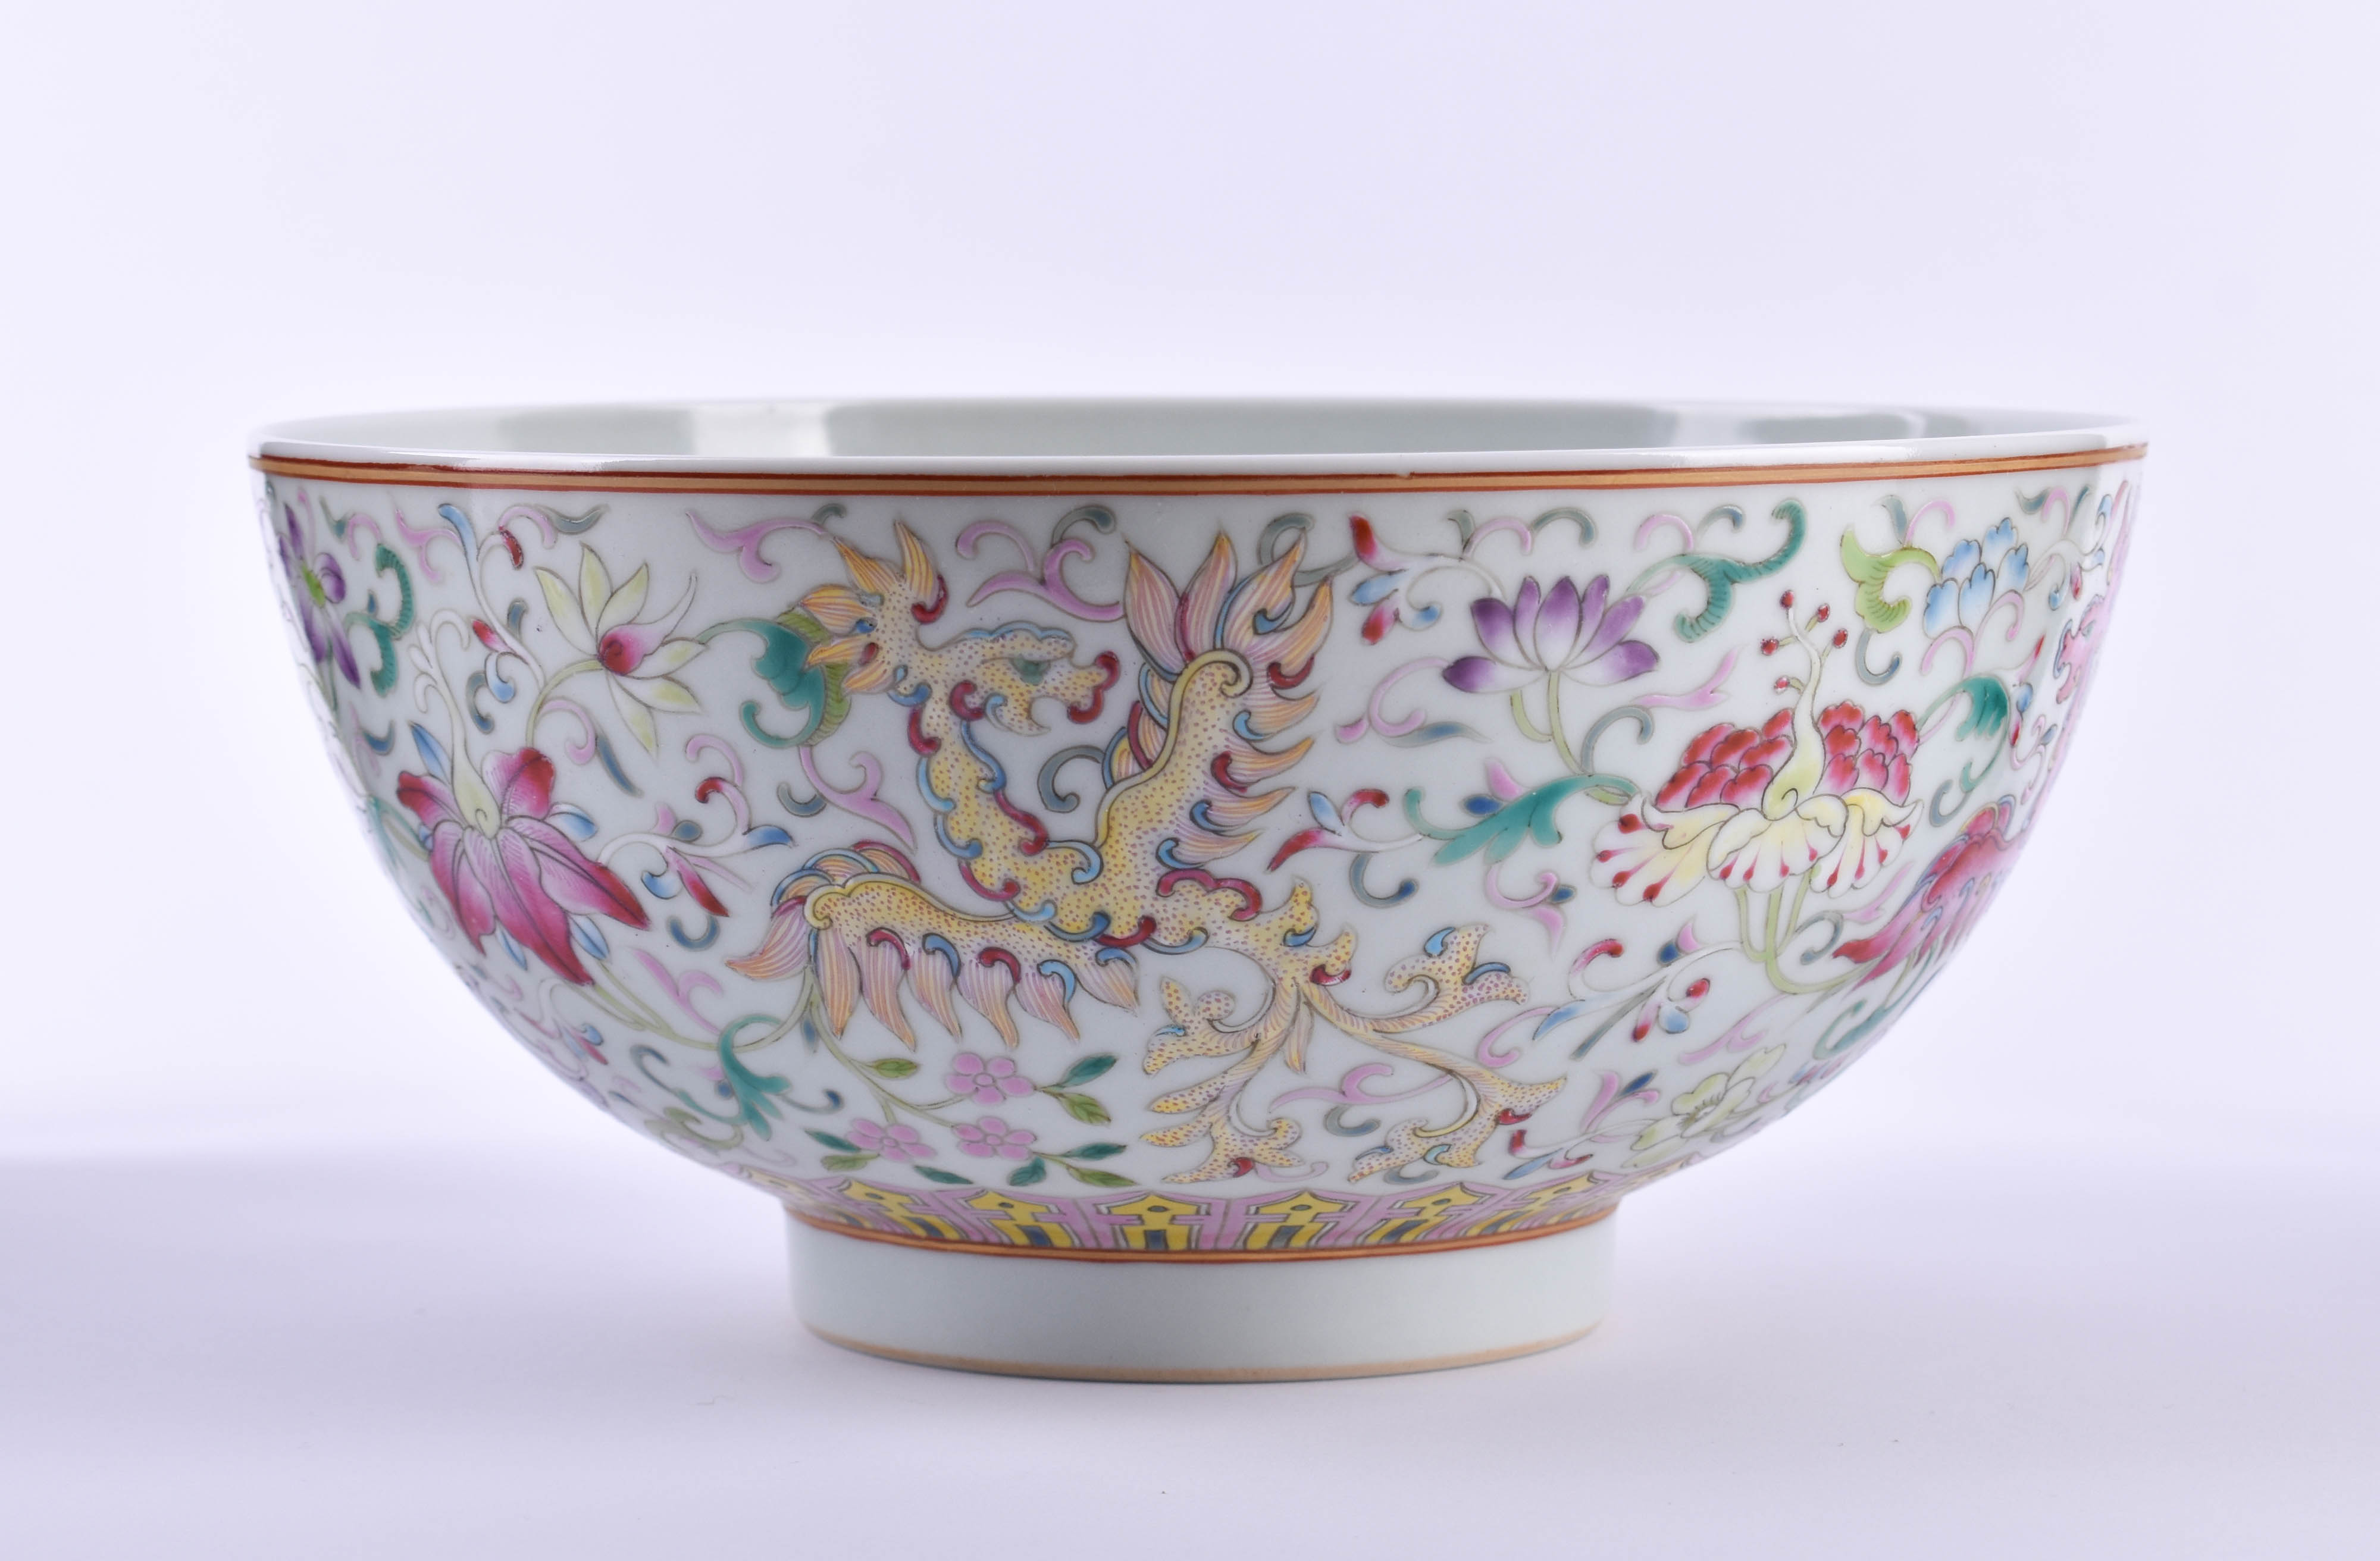  Famille Rose bowl China Qing dynasty - Image 4 of 10